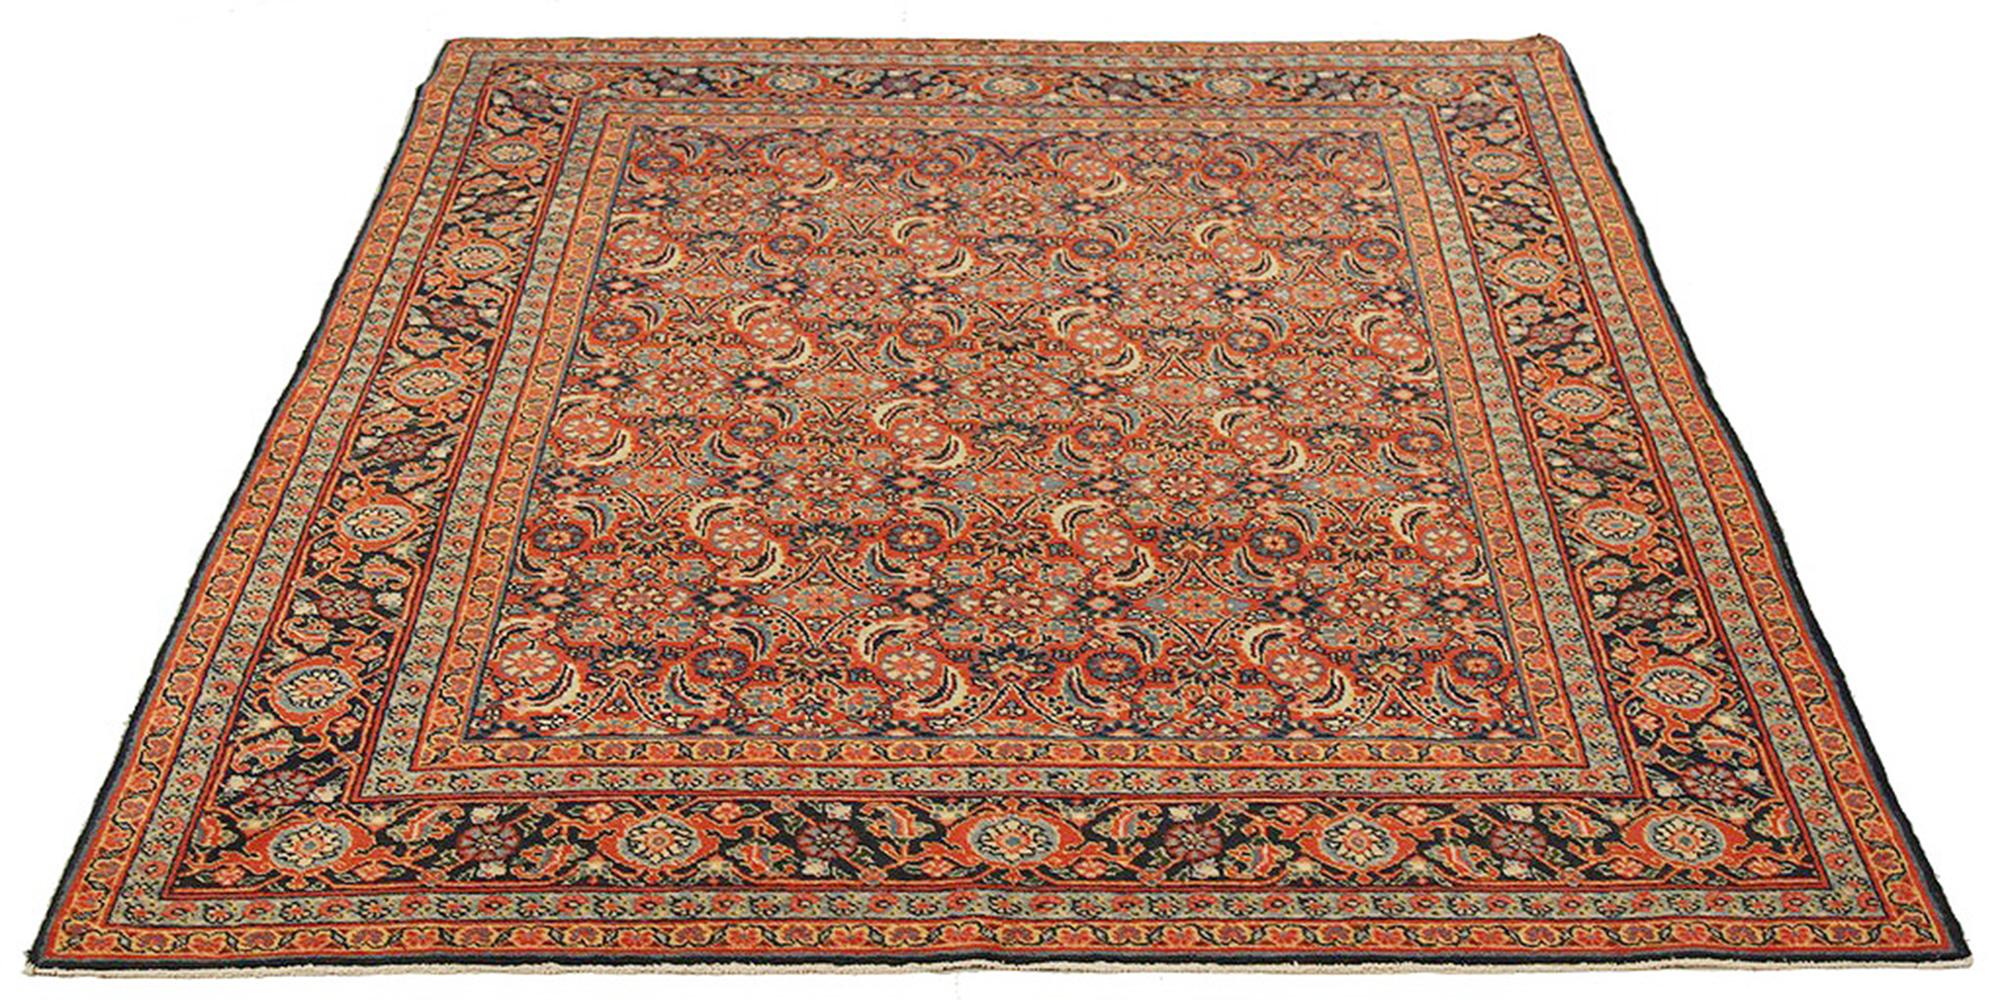 Antique Persian rug handwoven from the finest sheep’s wool and colored with all-natural vegetable dyes that are safe for humans and pets. It’s a traditional Tabriz weaving featuring a lovely ensemble of floral designs in gray and black over a beige